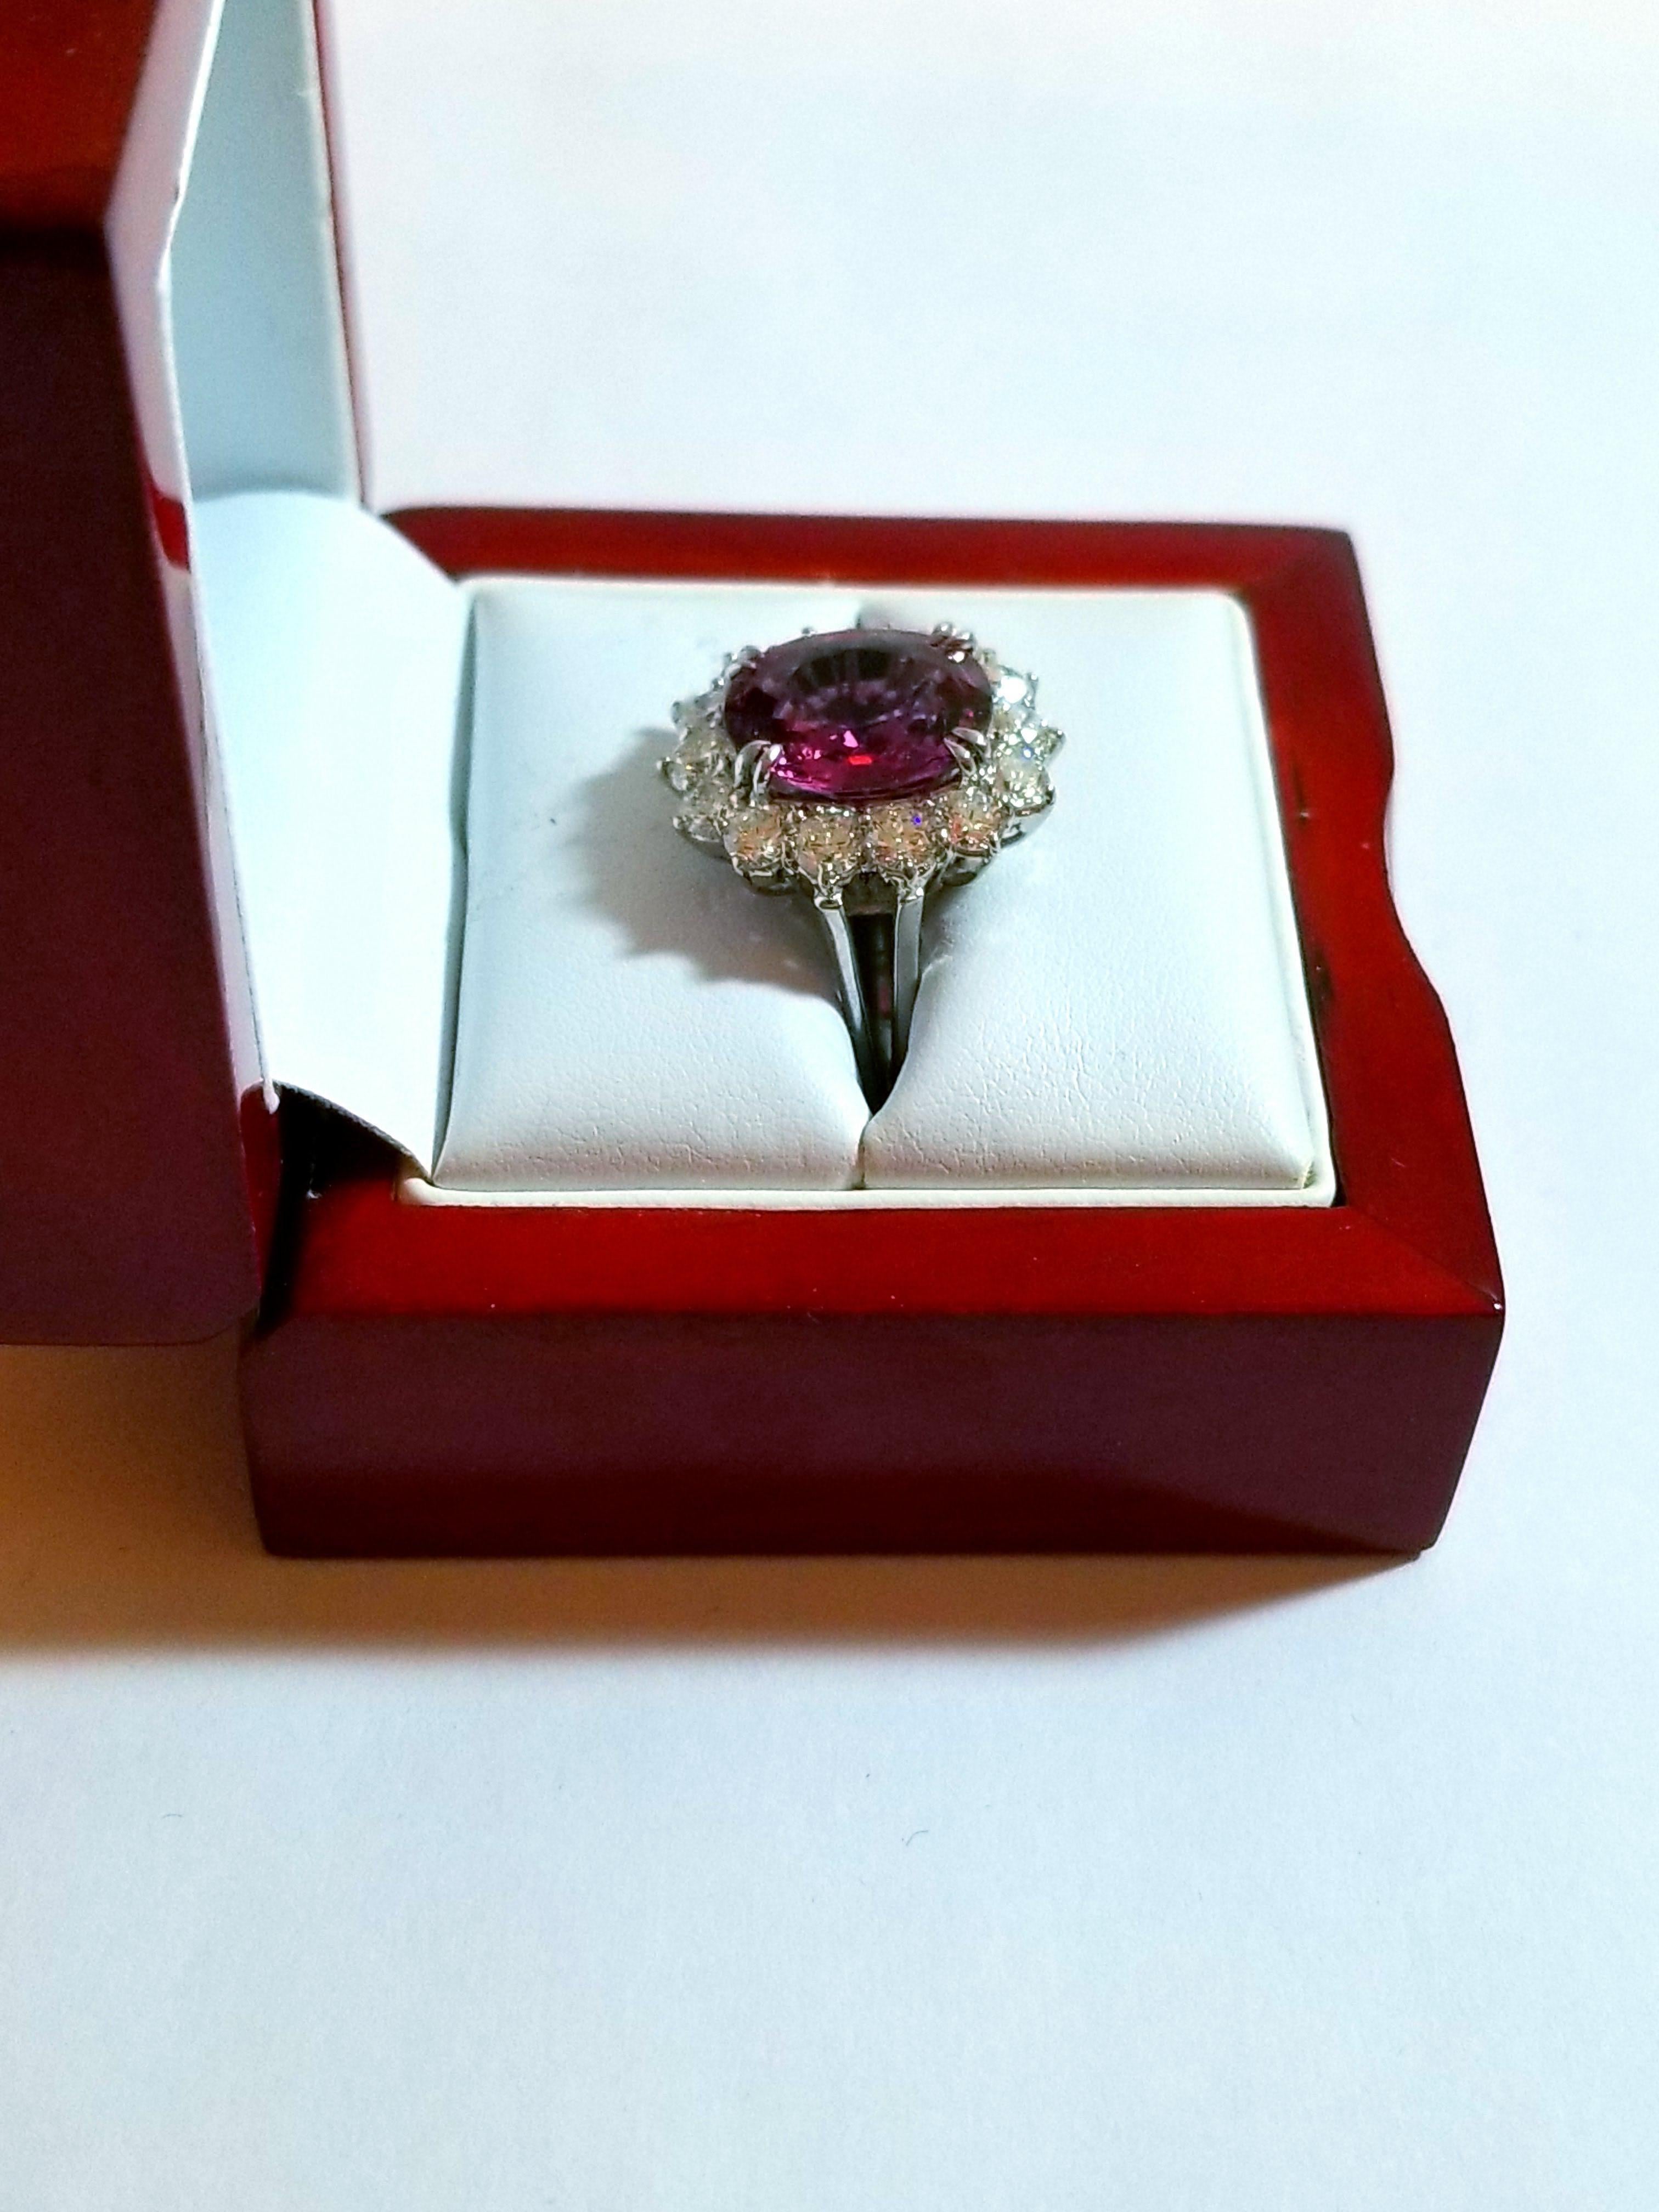  NEW Cert 6.77CT Unheated Natural Vivid Hot Pink Spinel Diamond Ring in Platinum For Sale 1